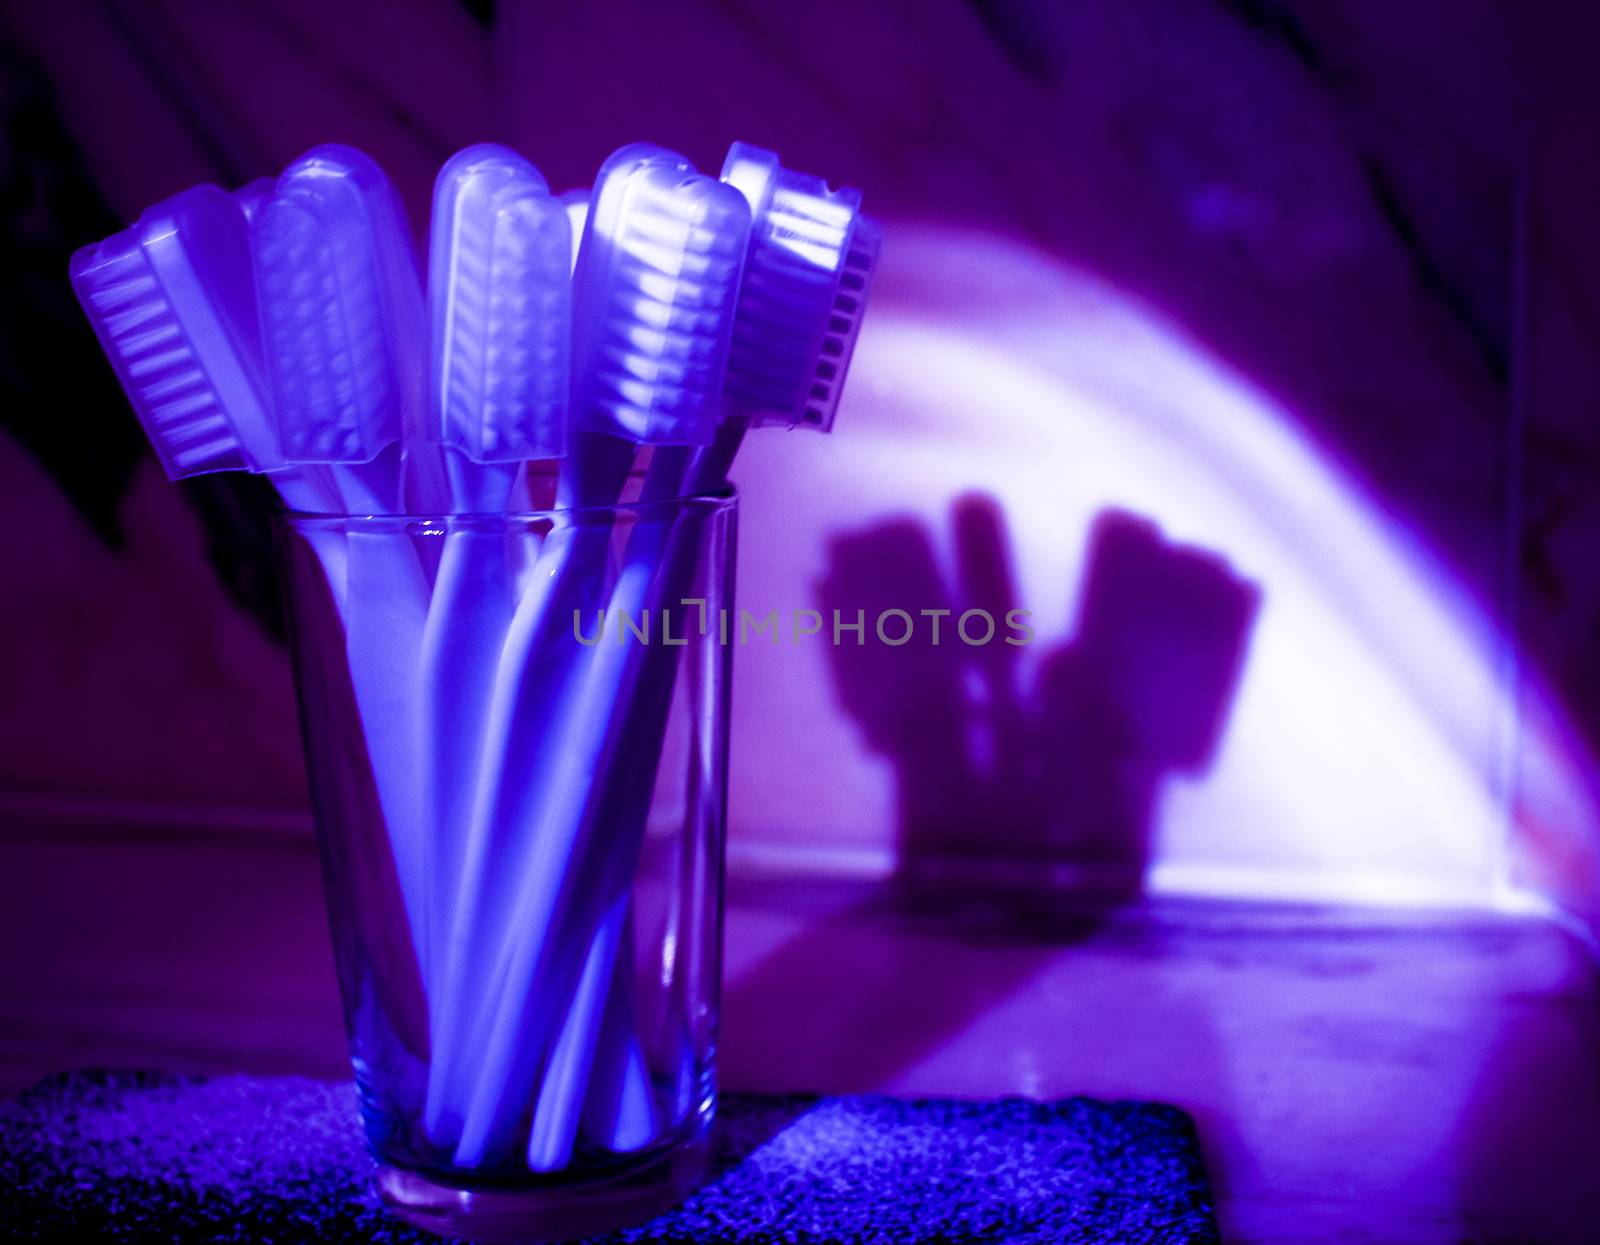 Toothbrushes with bluish purple shadow reflected on the wall.